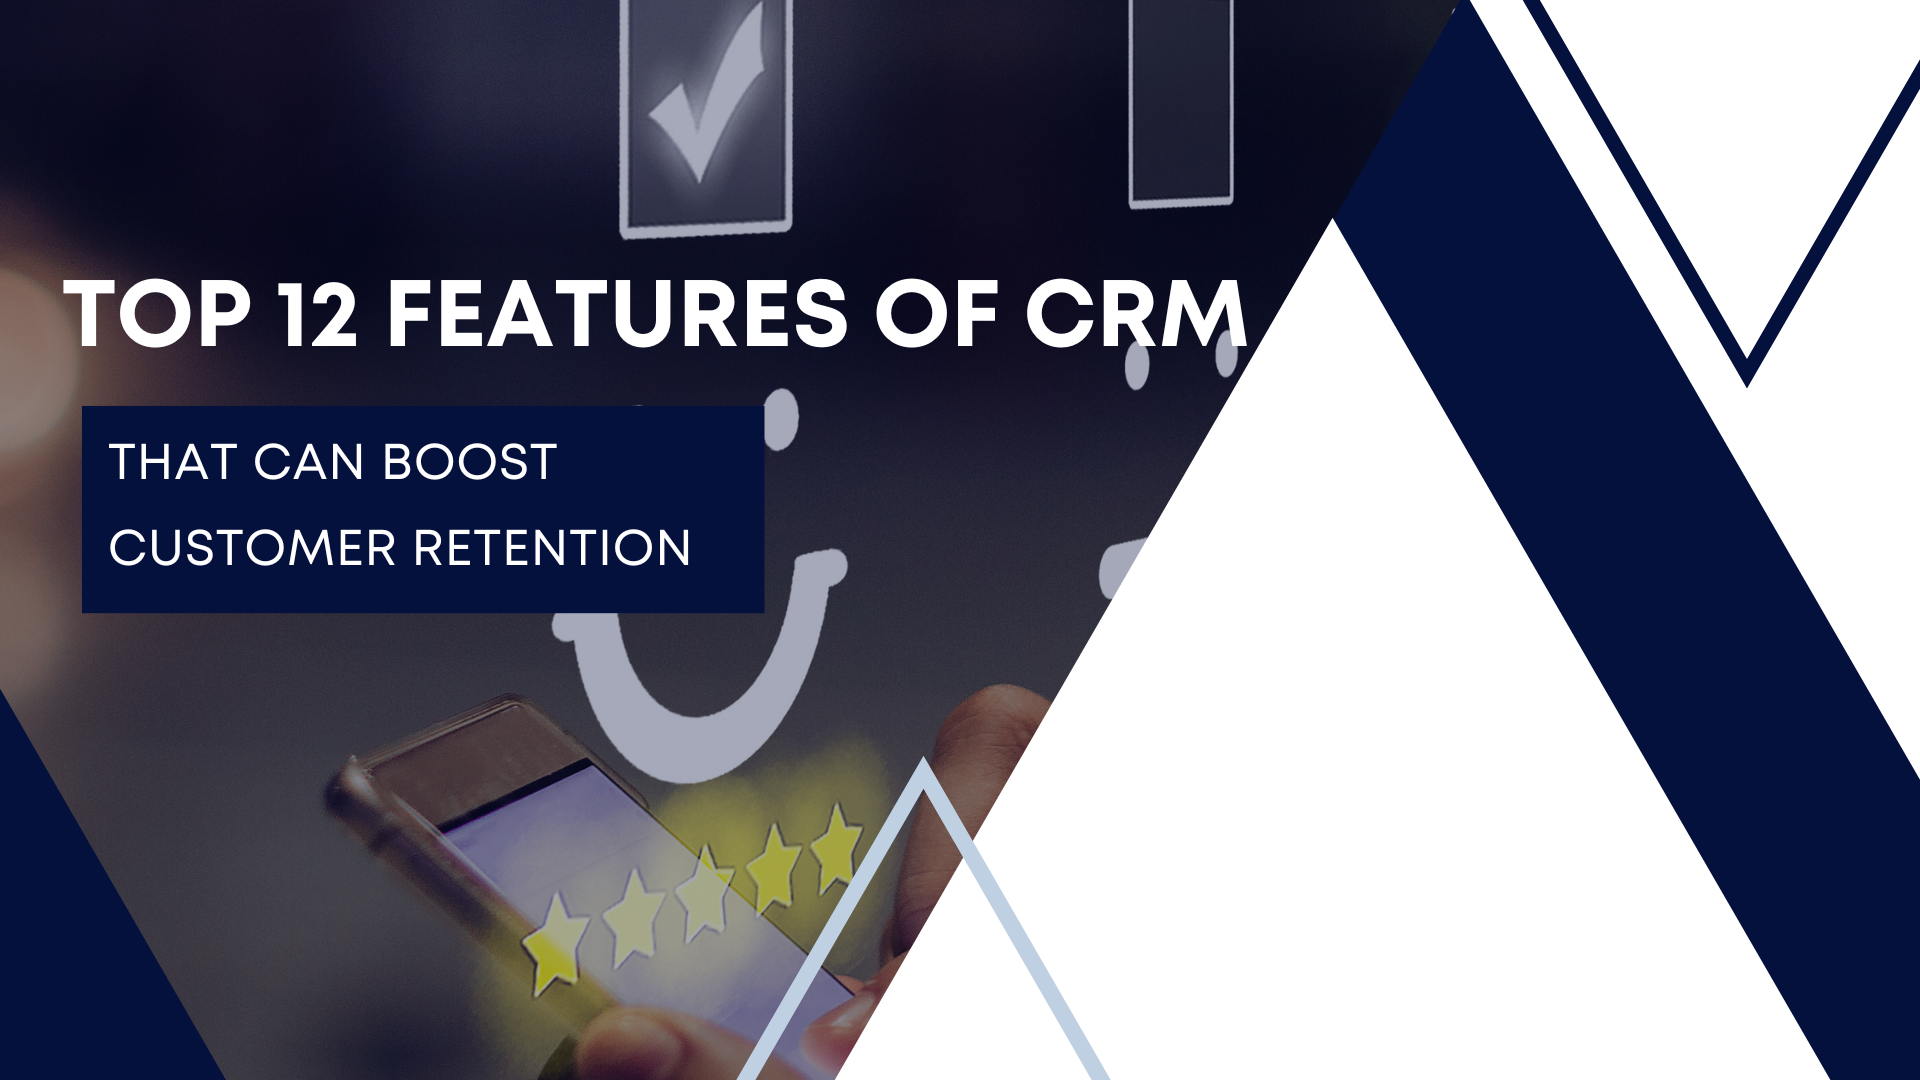 Top 12 features of CRM that Boosts Customer Retention